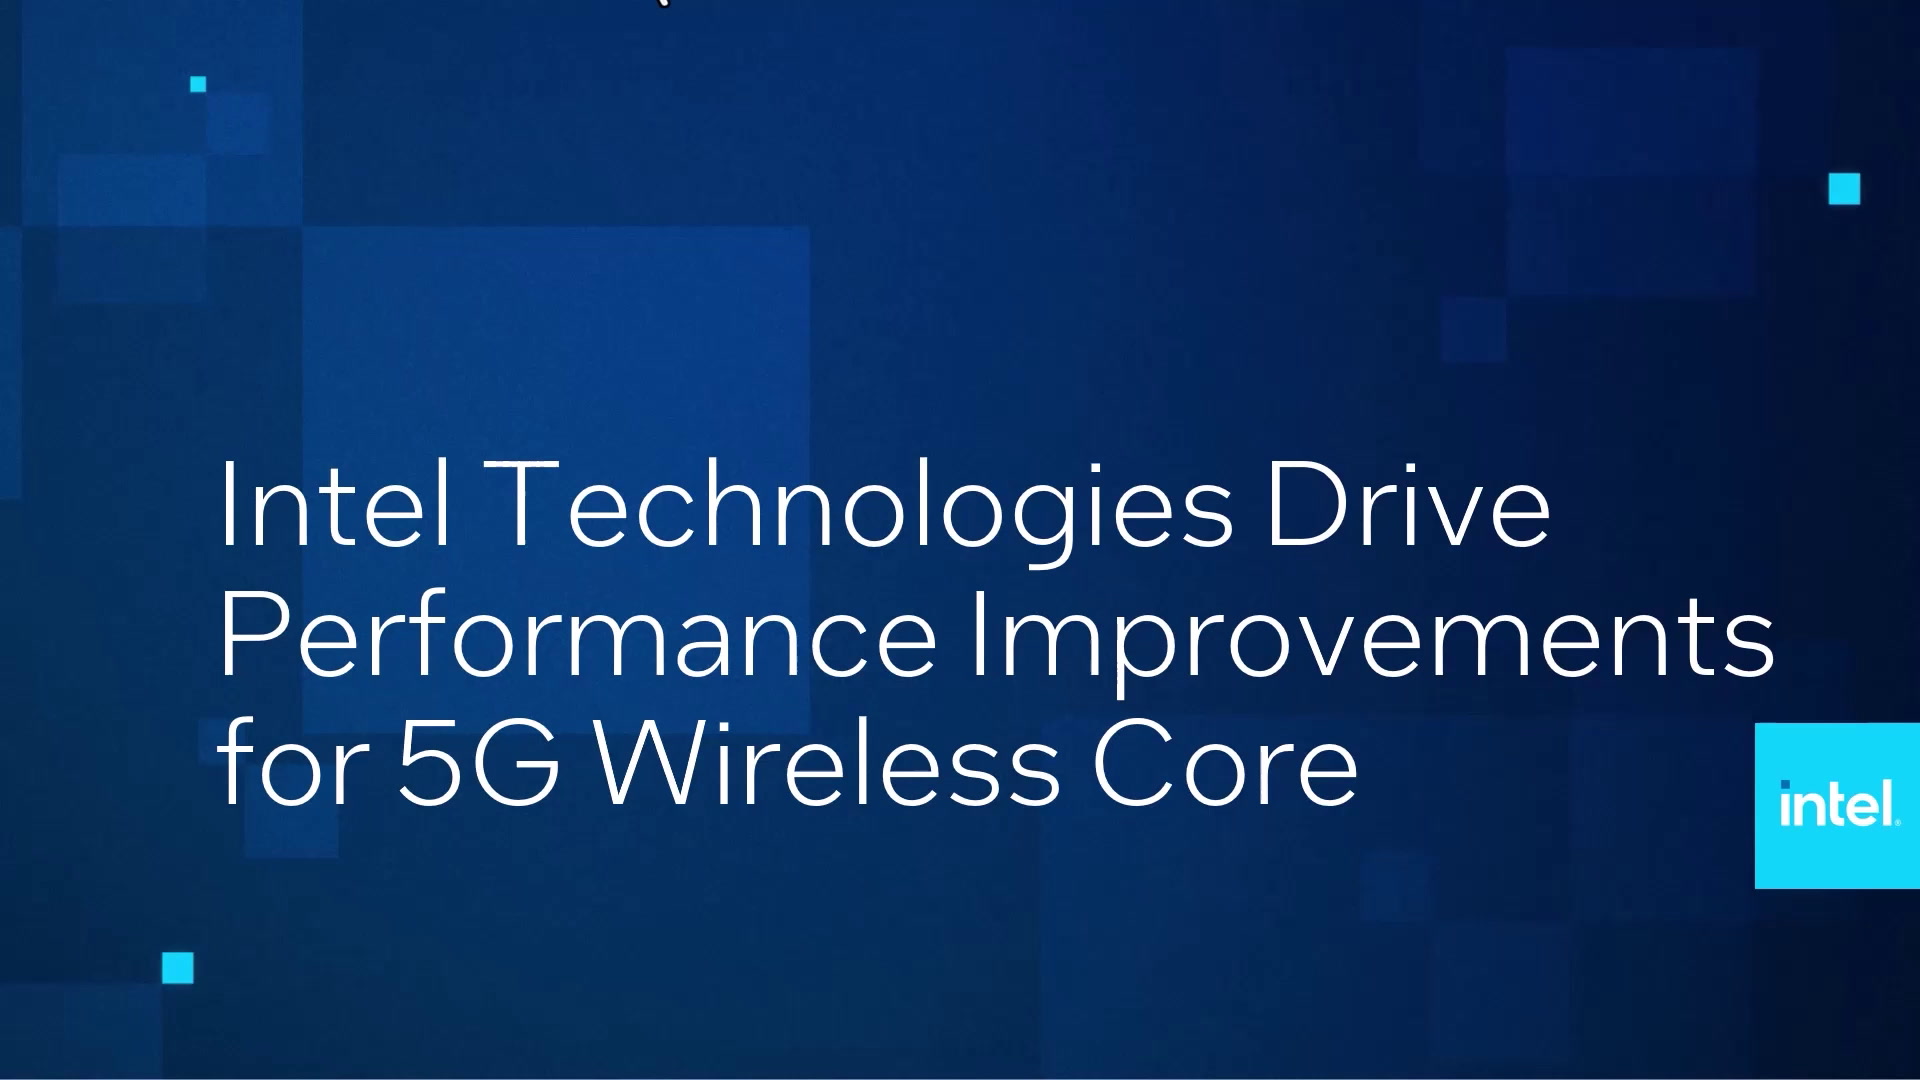 Chapter 1: Improving Performance for 5G Wireless Core